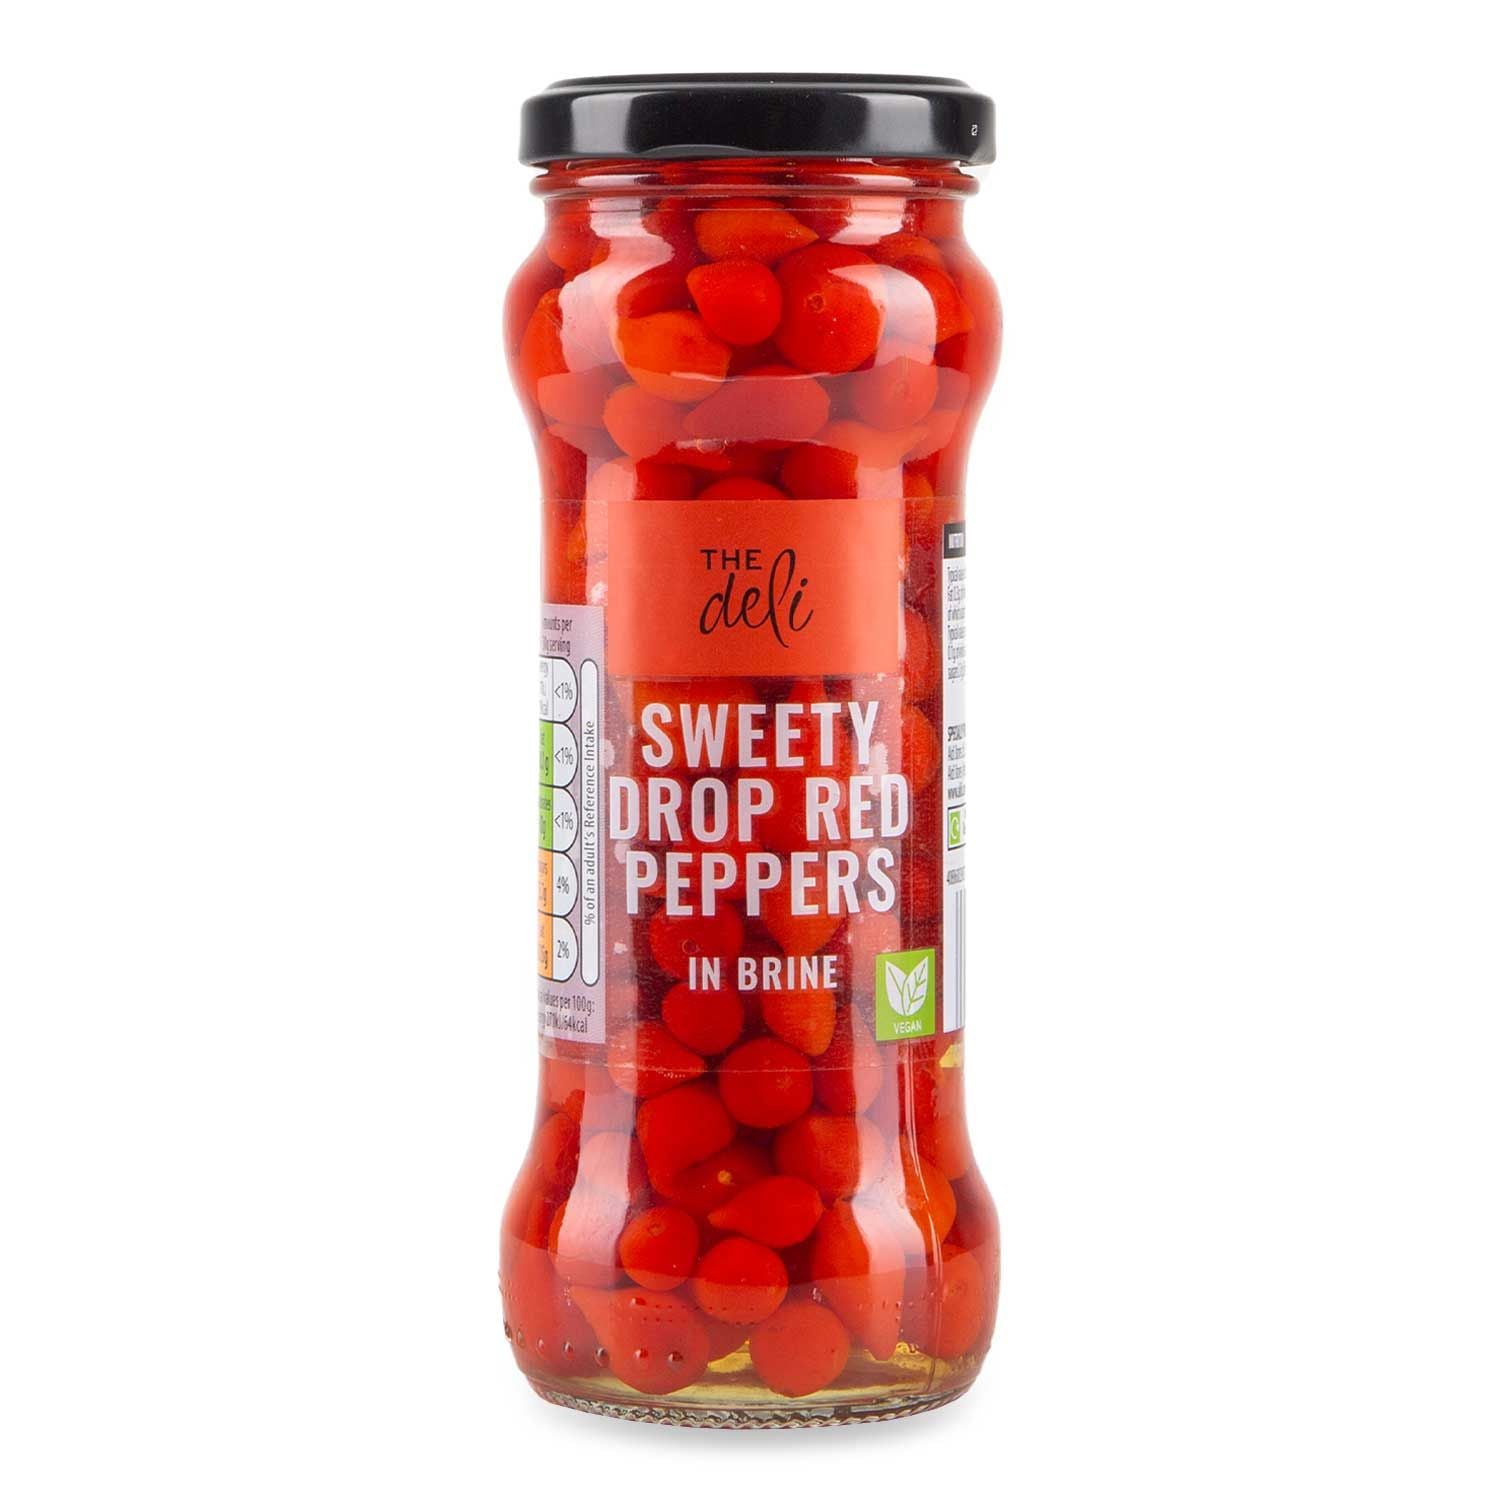 The Deli Sweety Drop Red Peppers In Brine 235g (150g Drained)